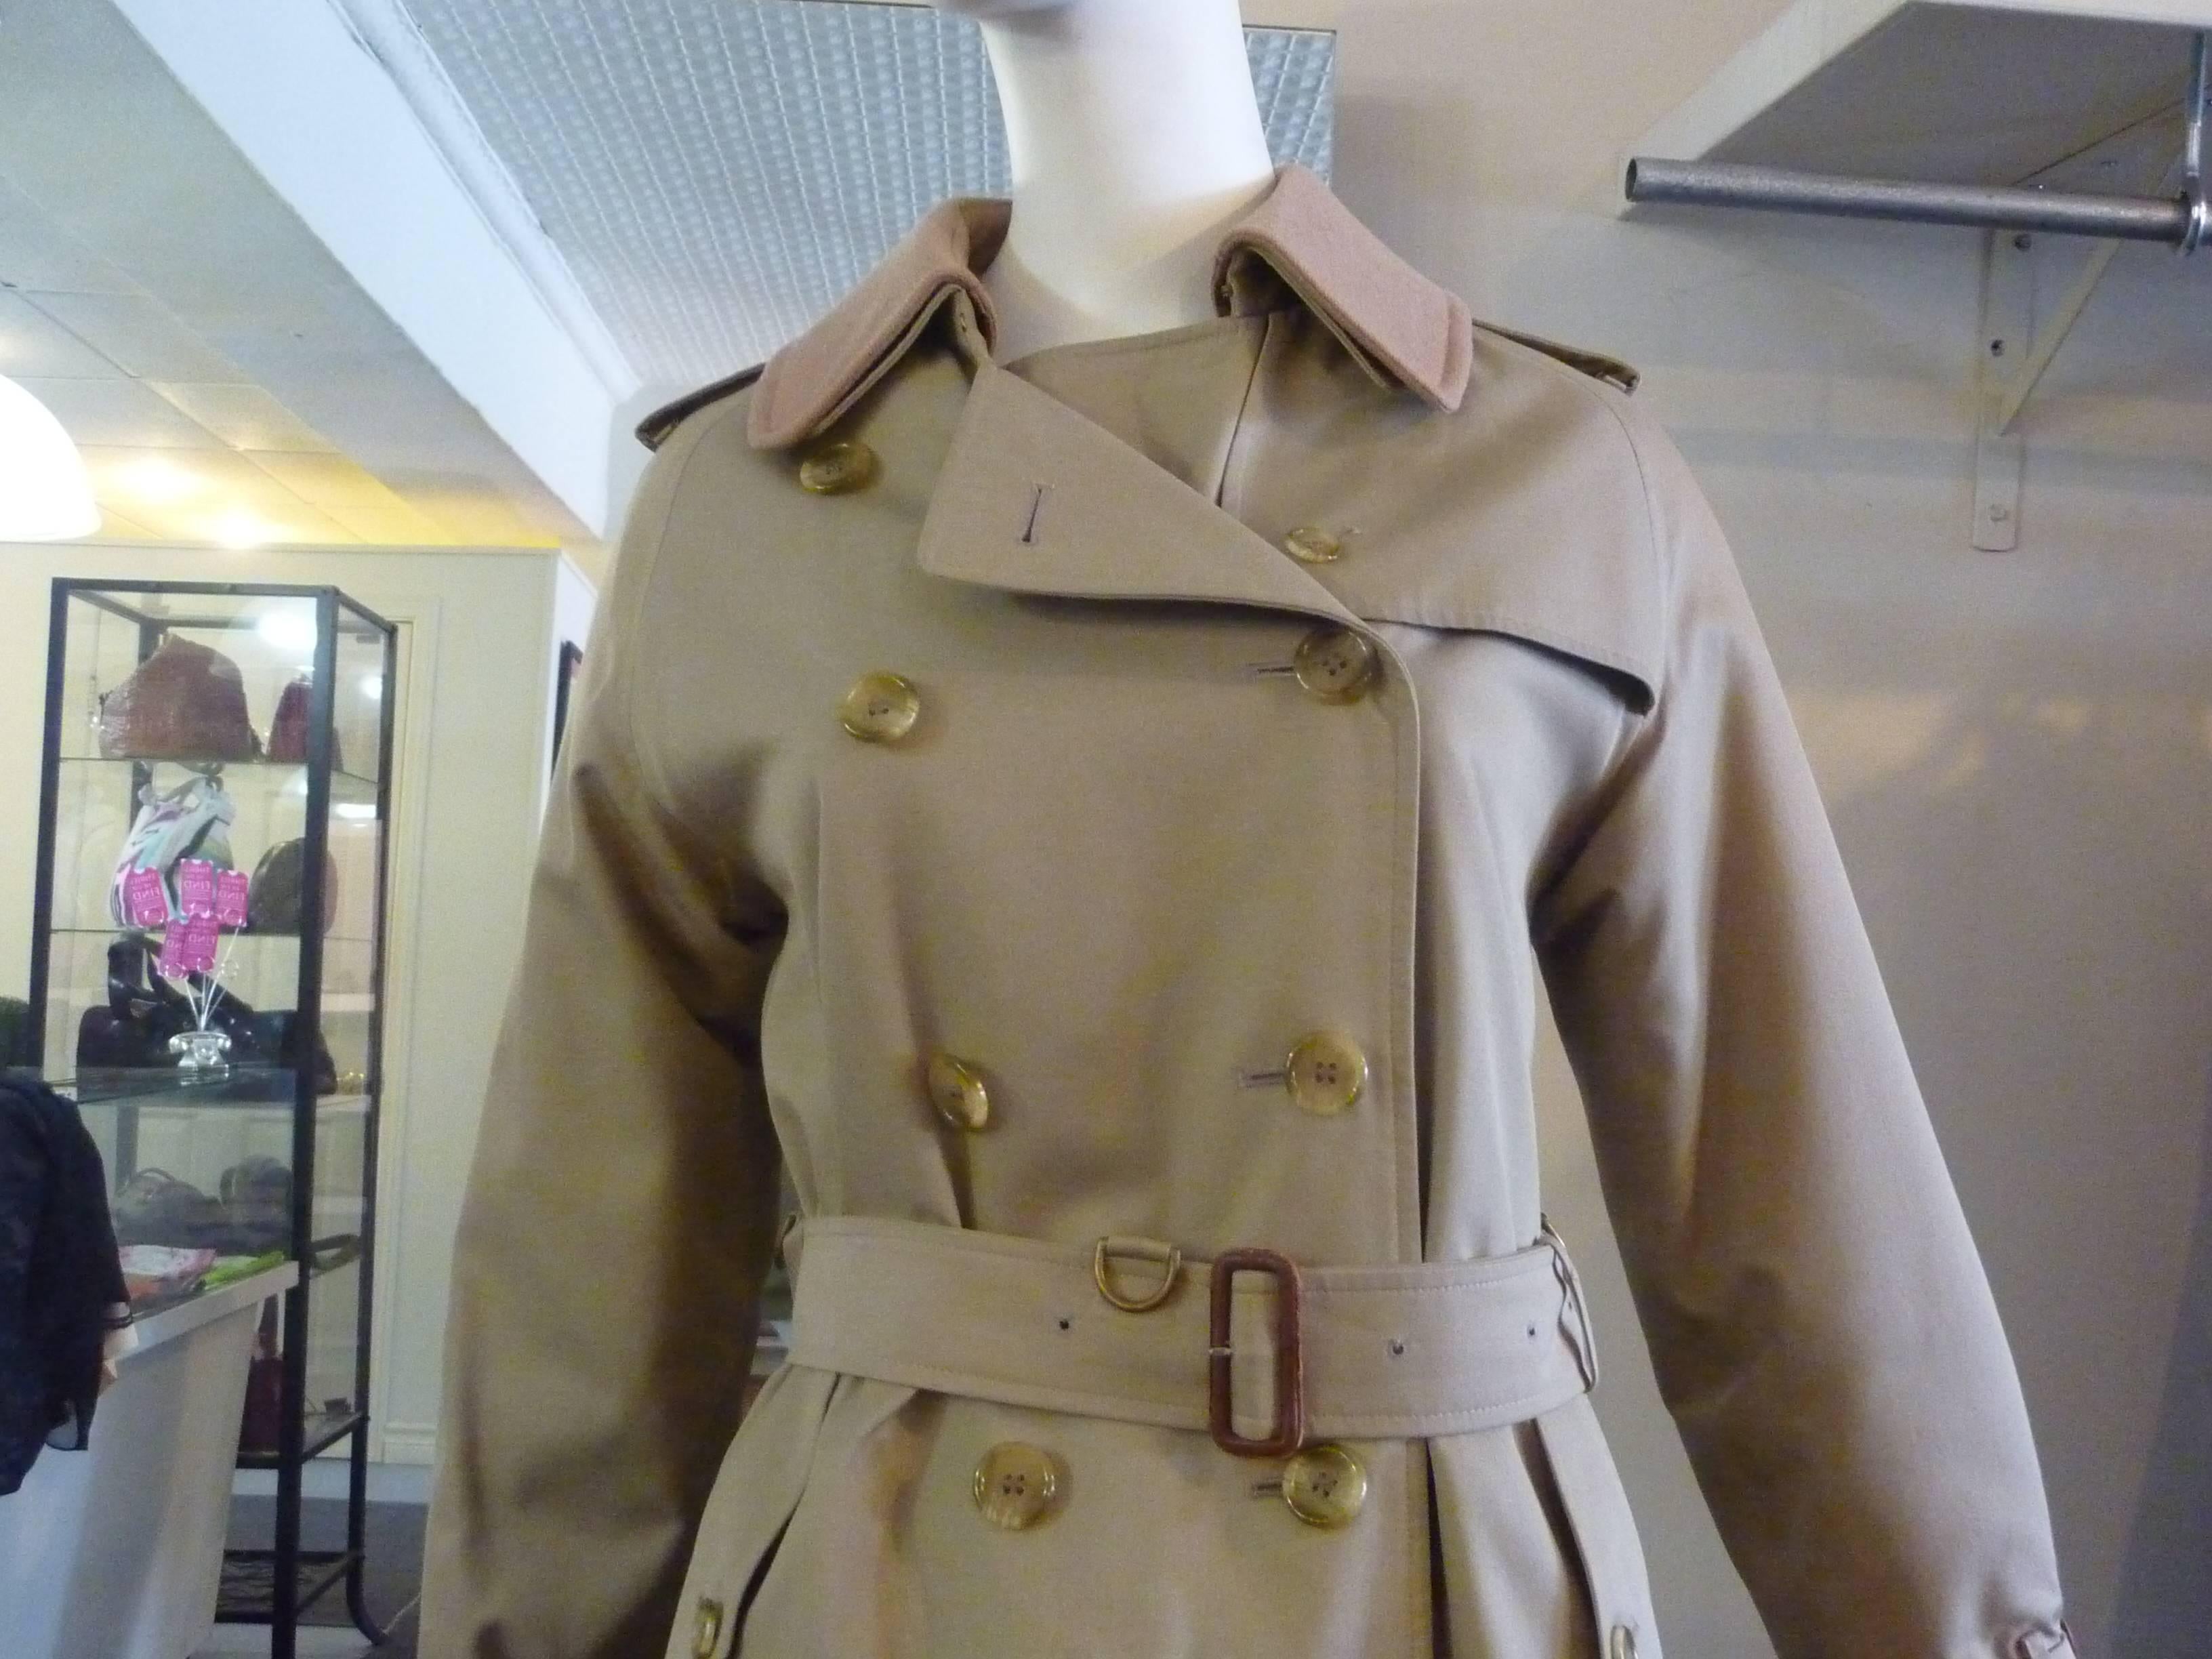 Near mint condition, the exception being a couple of marks and two out of the 50 buttons missing. There are two button down side pockets and a pleated feature at the back with a half cape look and epaulettes.

The coat has a removeable wool/camel